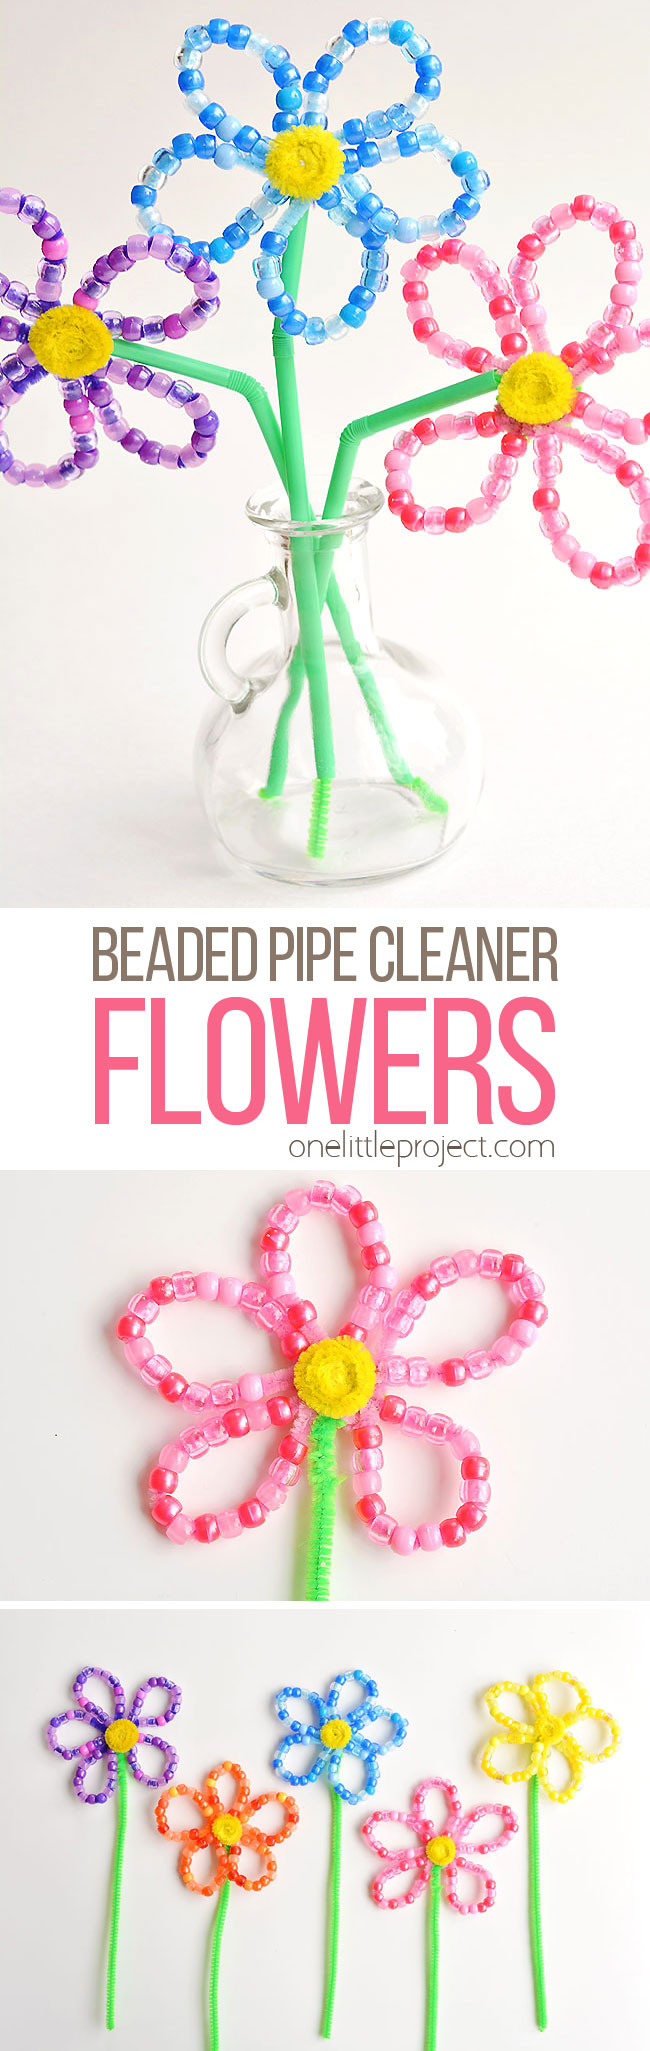 These beaded pipe cleaner flowers are SO PRETTY and they're really easy to make! This is such a fun kids craft and a great activity to develop fine motor skills. Each flower takes less than 10 minutes to make using simple craft supplies. This is a great spring craft or summer craft idea! Wouldn't they make an awesome homemade Mother's Day gift!?